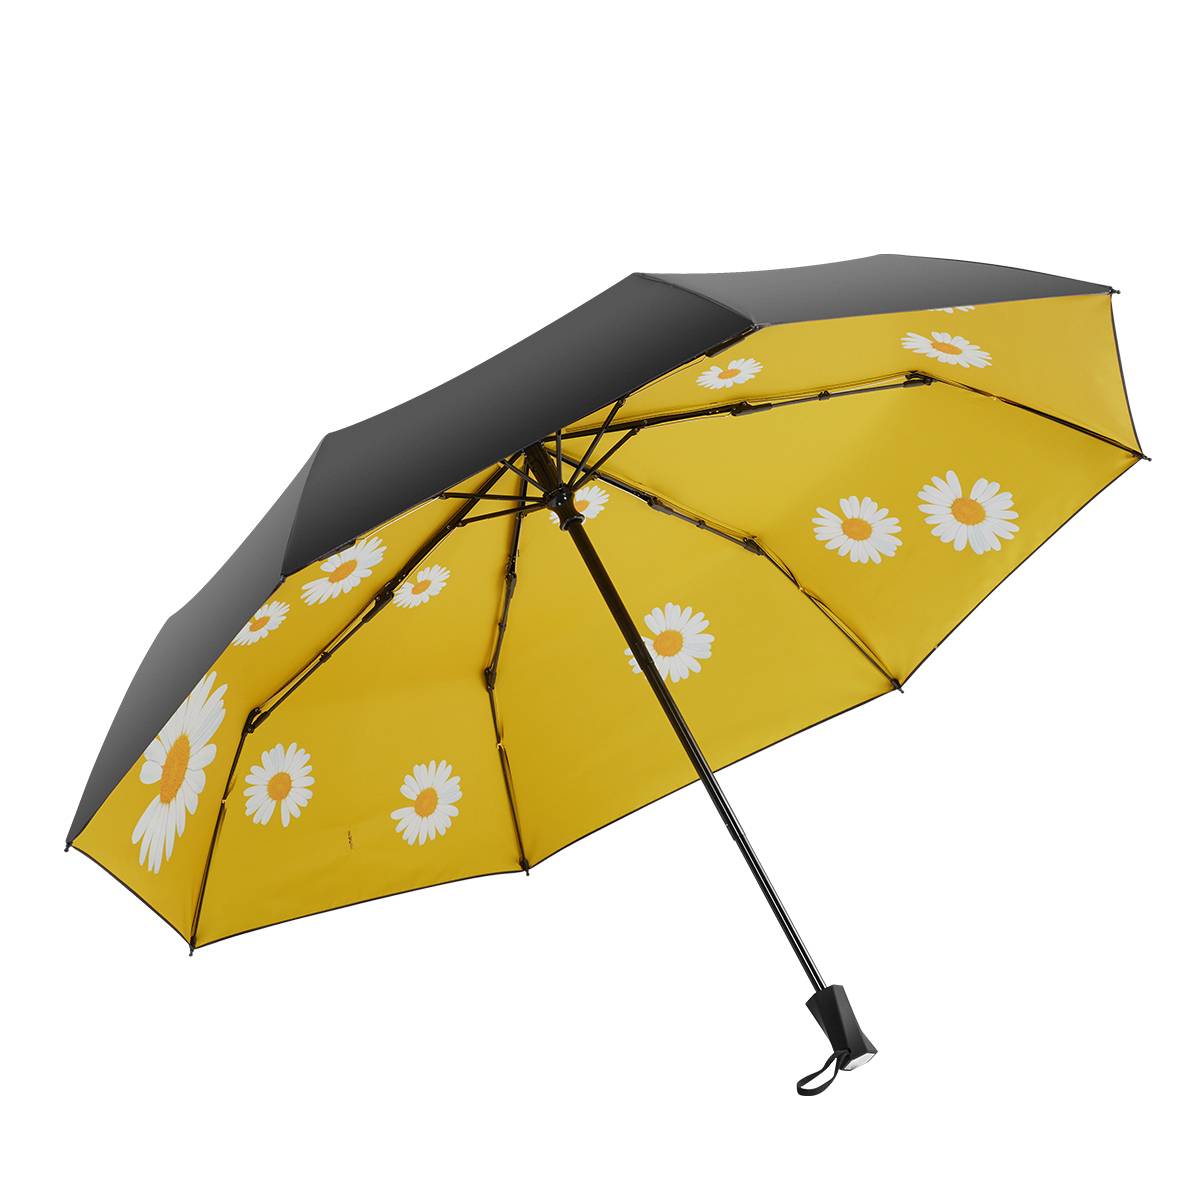 Fixed Competitive Price Umbrella With 2 Folding - 21 inch 8 ribs manual open unique handle design with daisy flower 3 fold umbrella – DongFangZhanXin